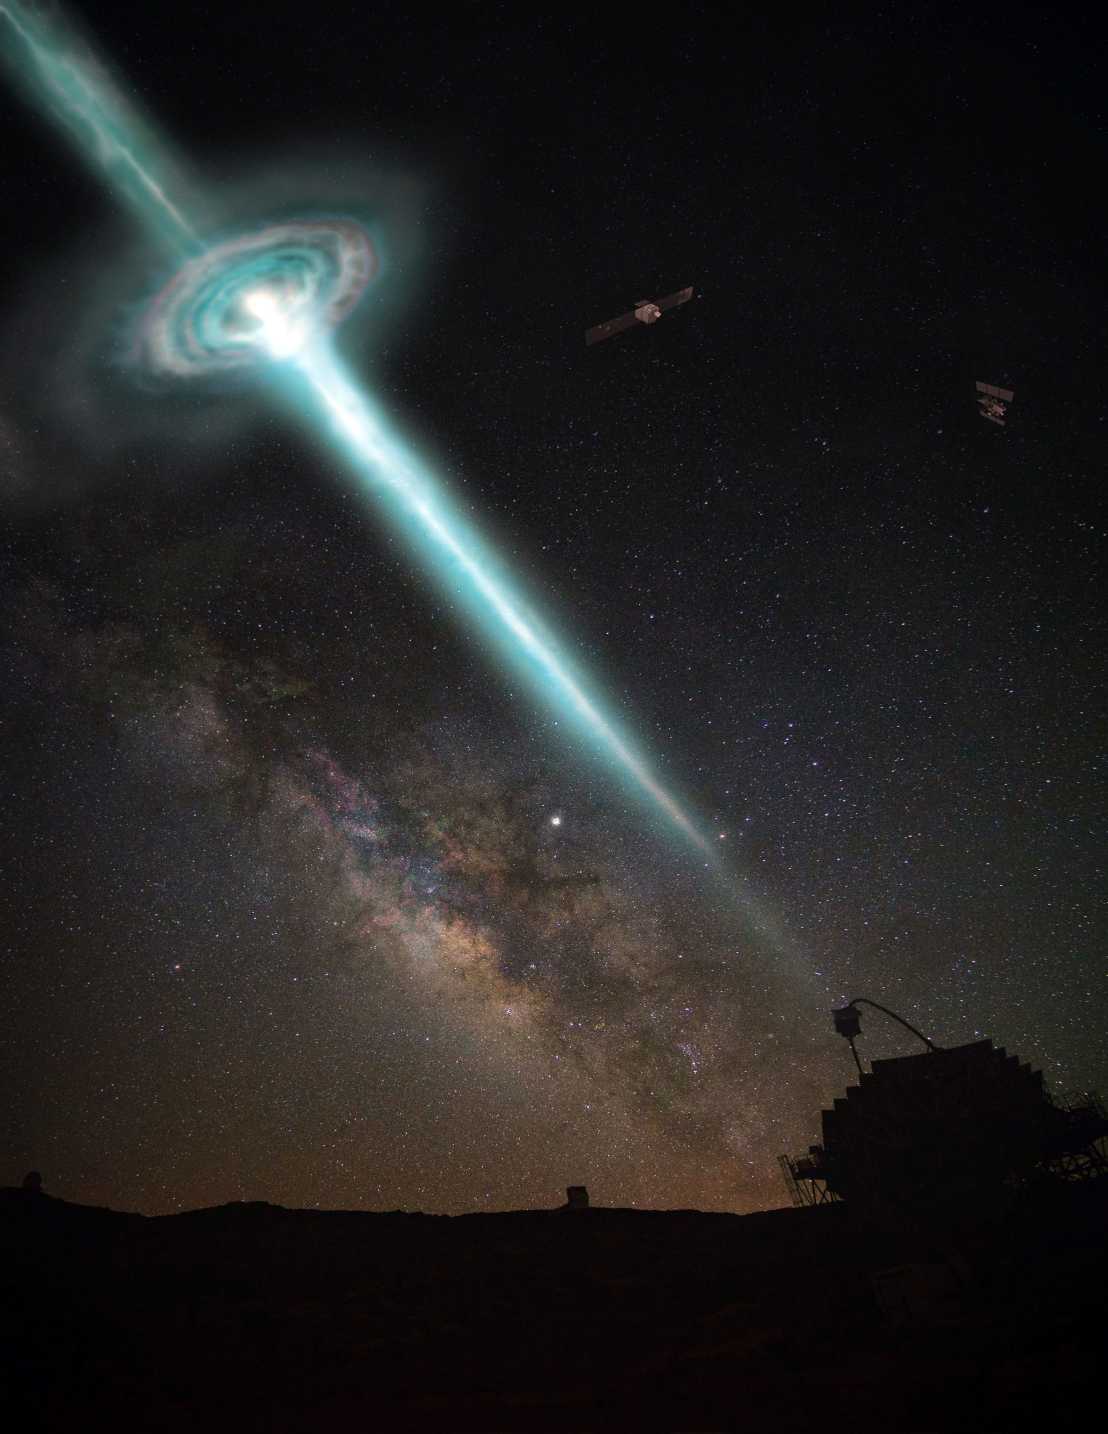 Enlarged view: Artist’s impression of a gamma ray burst observed by the MAGIC telescope system and satellite observatories